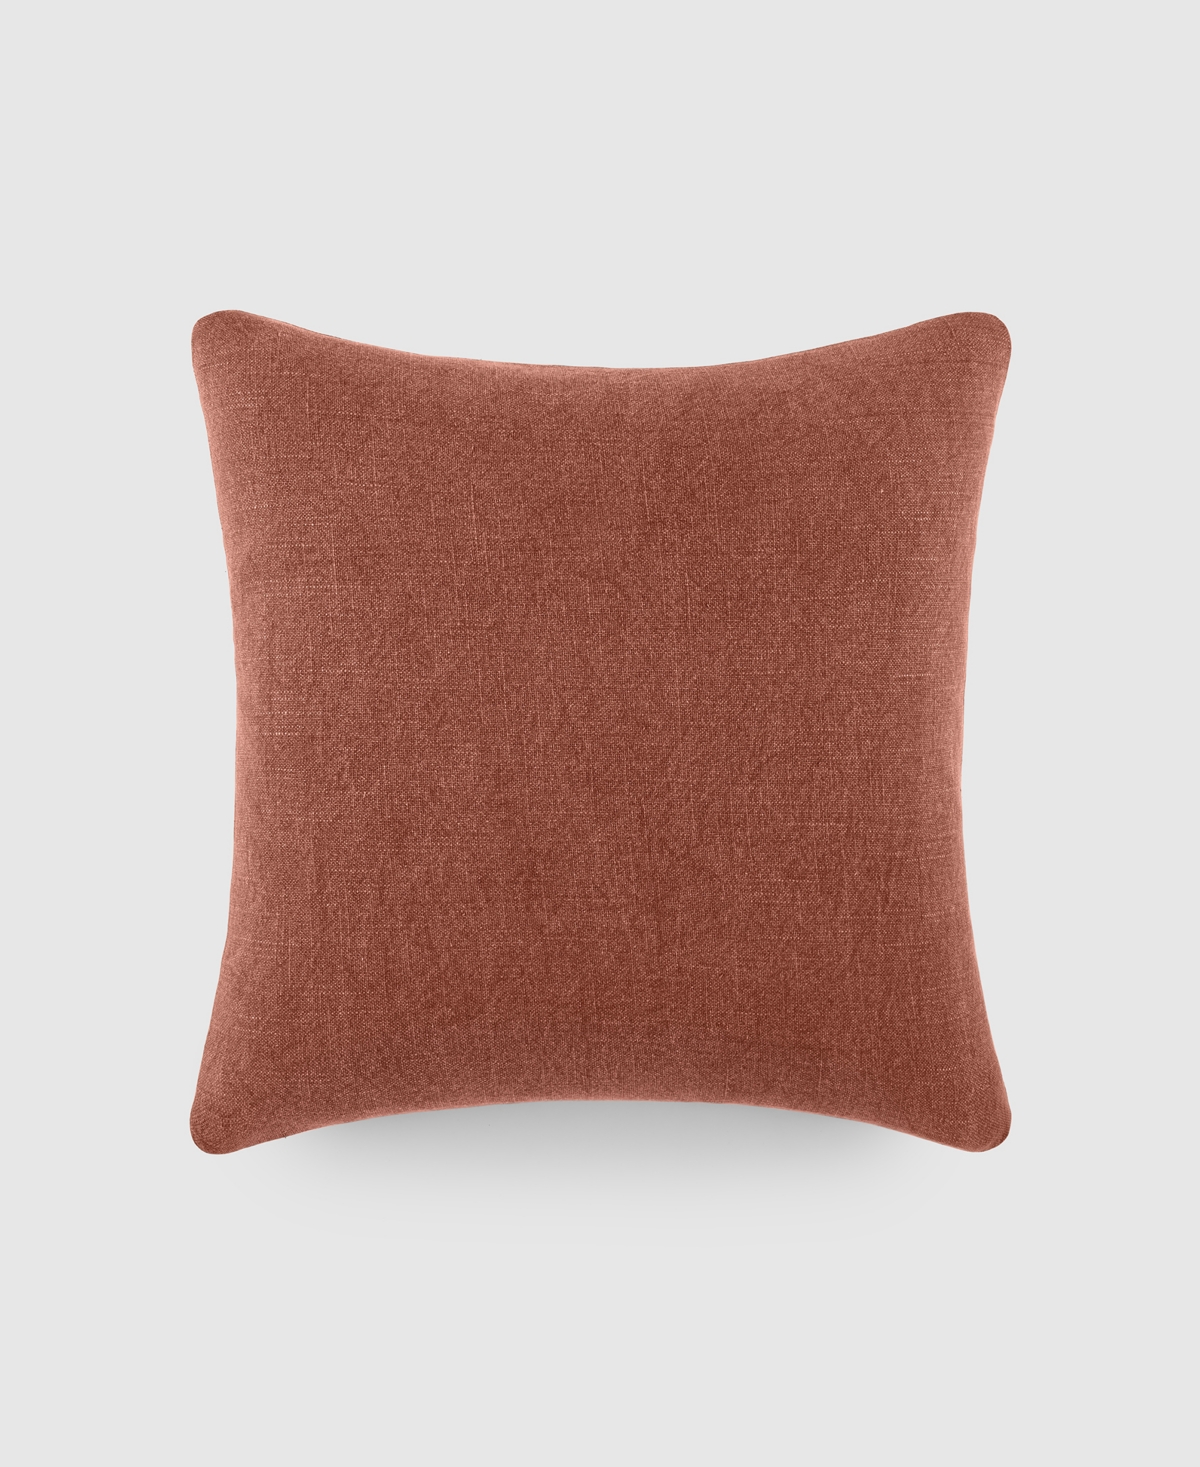 Ienjoy Home Washed And Distressed Decorative Pillow, 20" X 20" In Terracotta